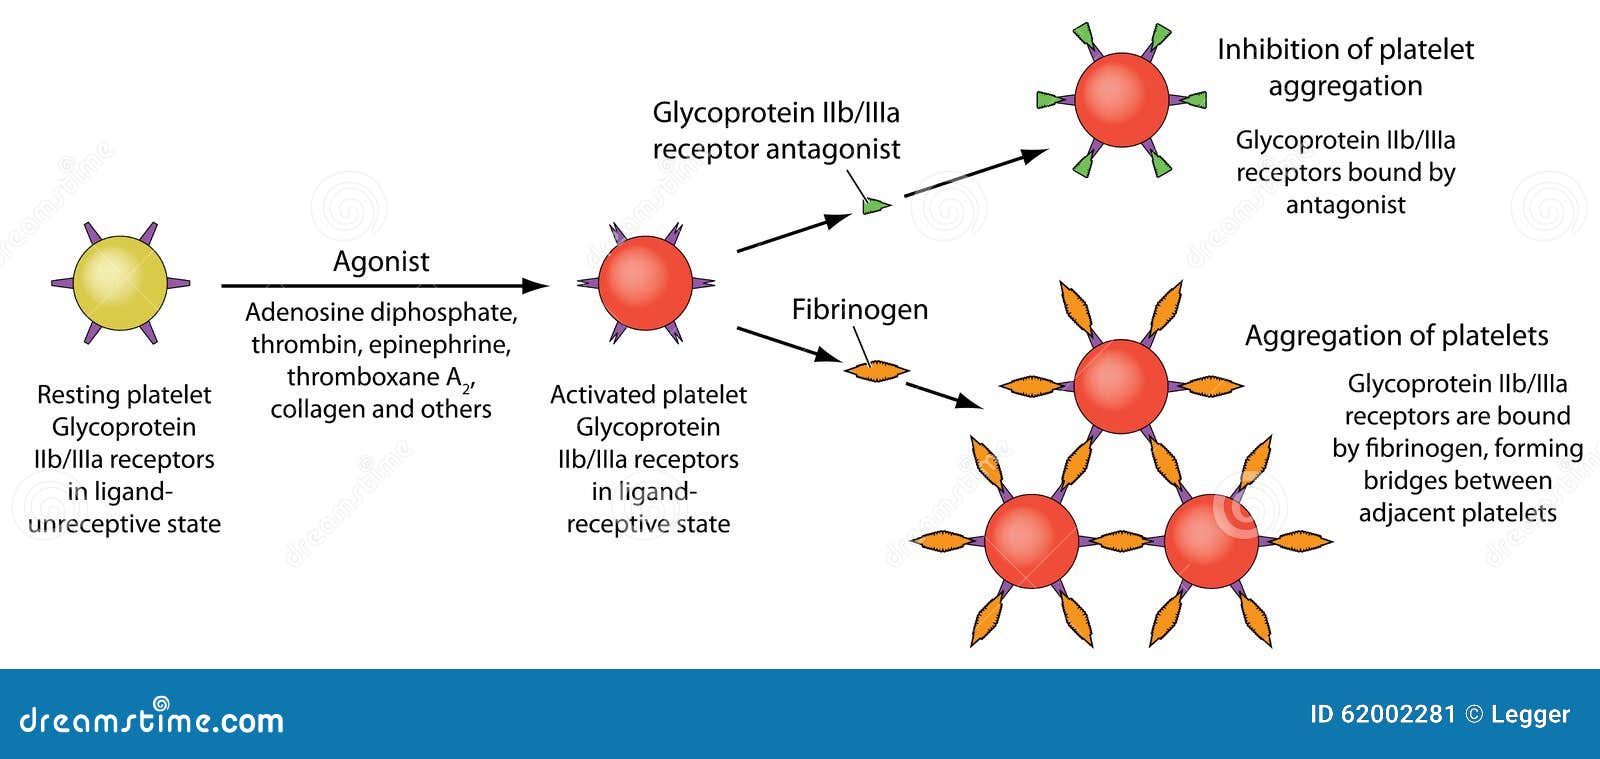 platelet aggregation and inhibition